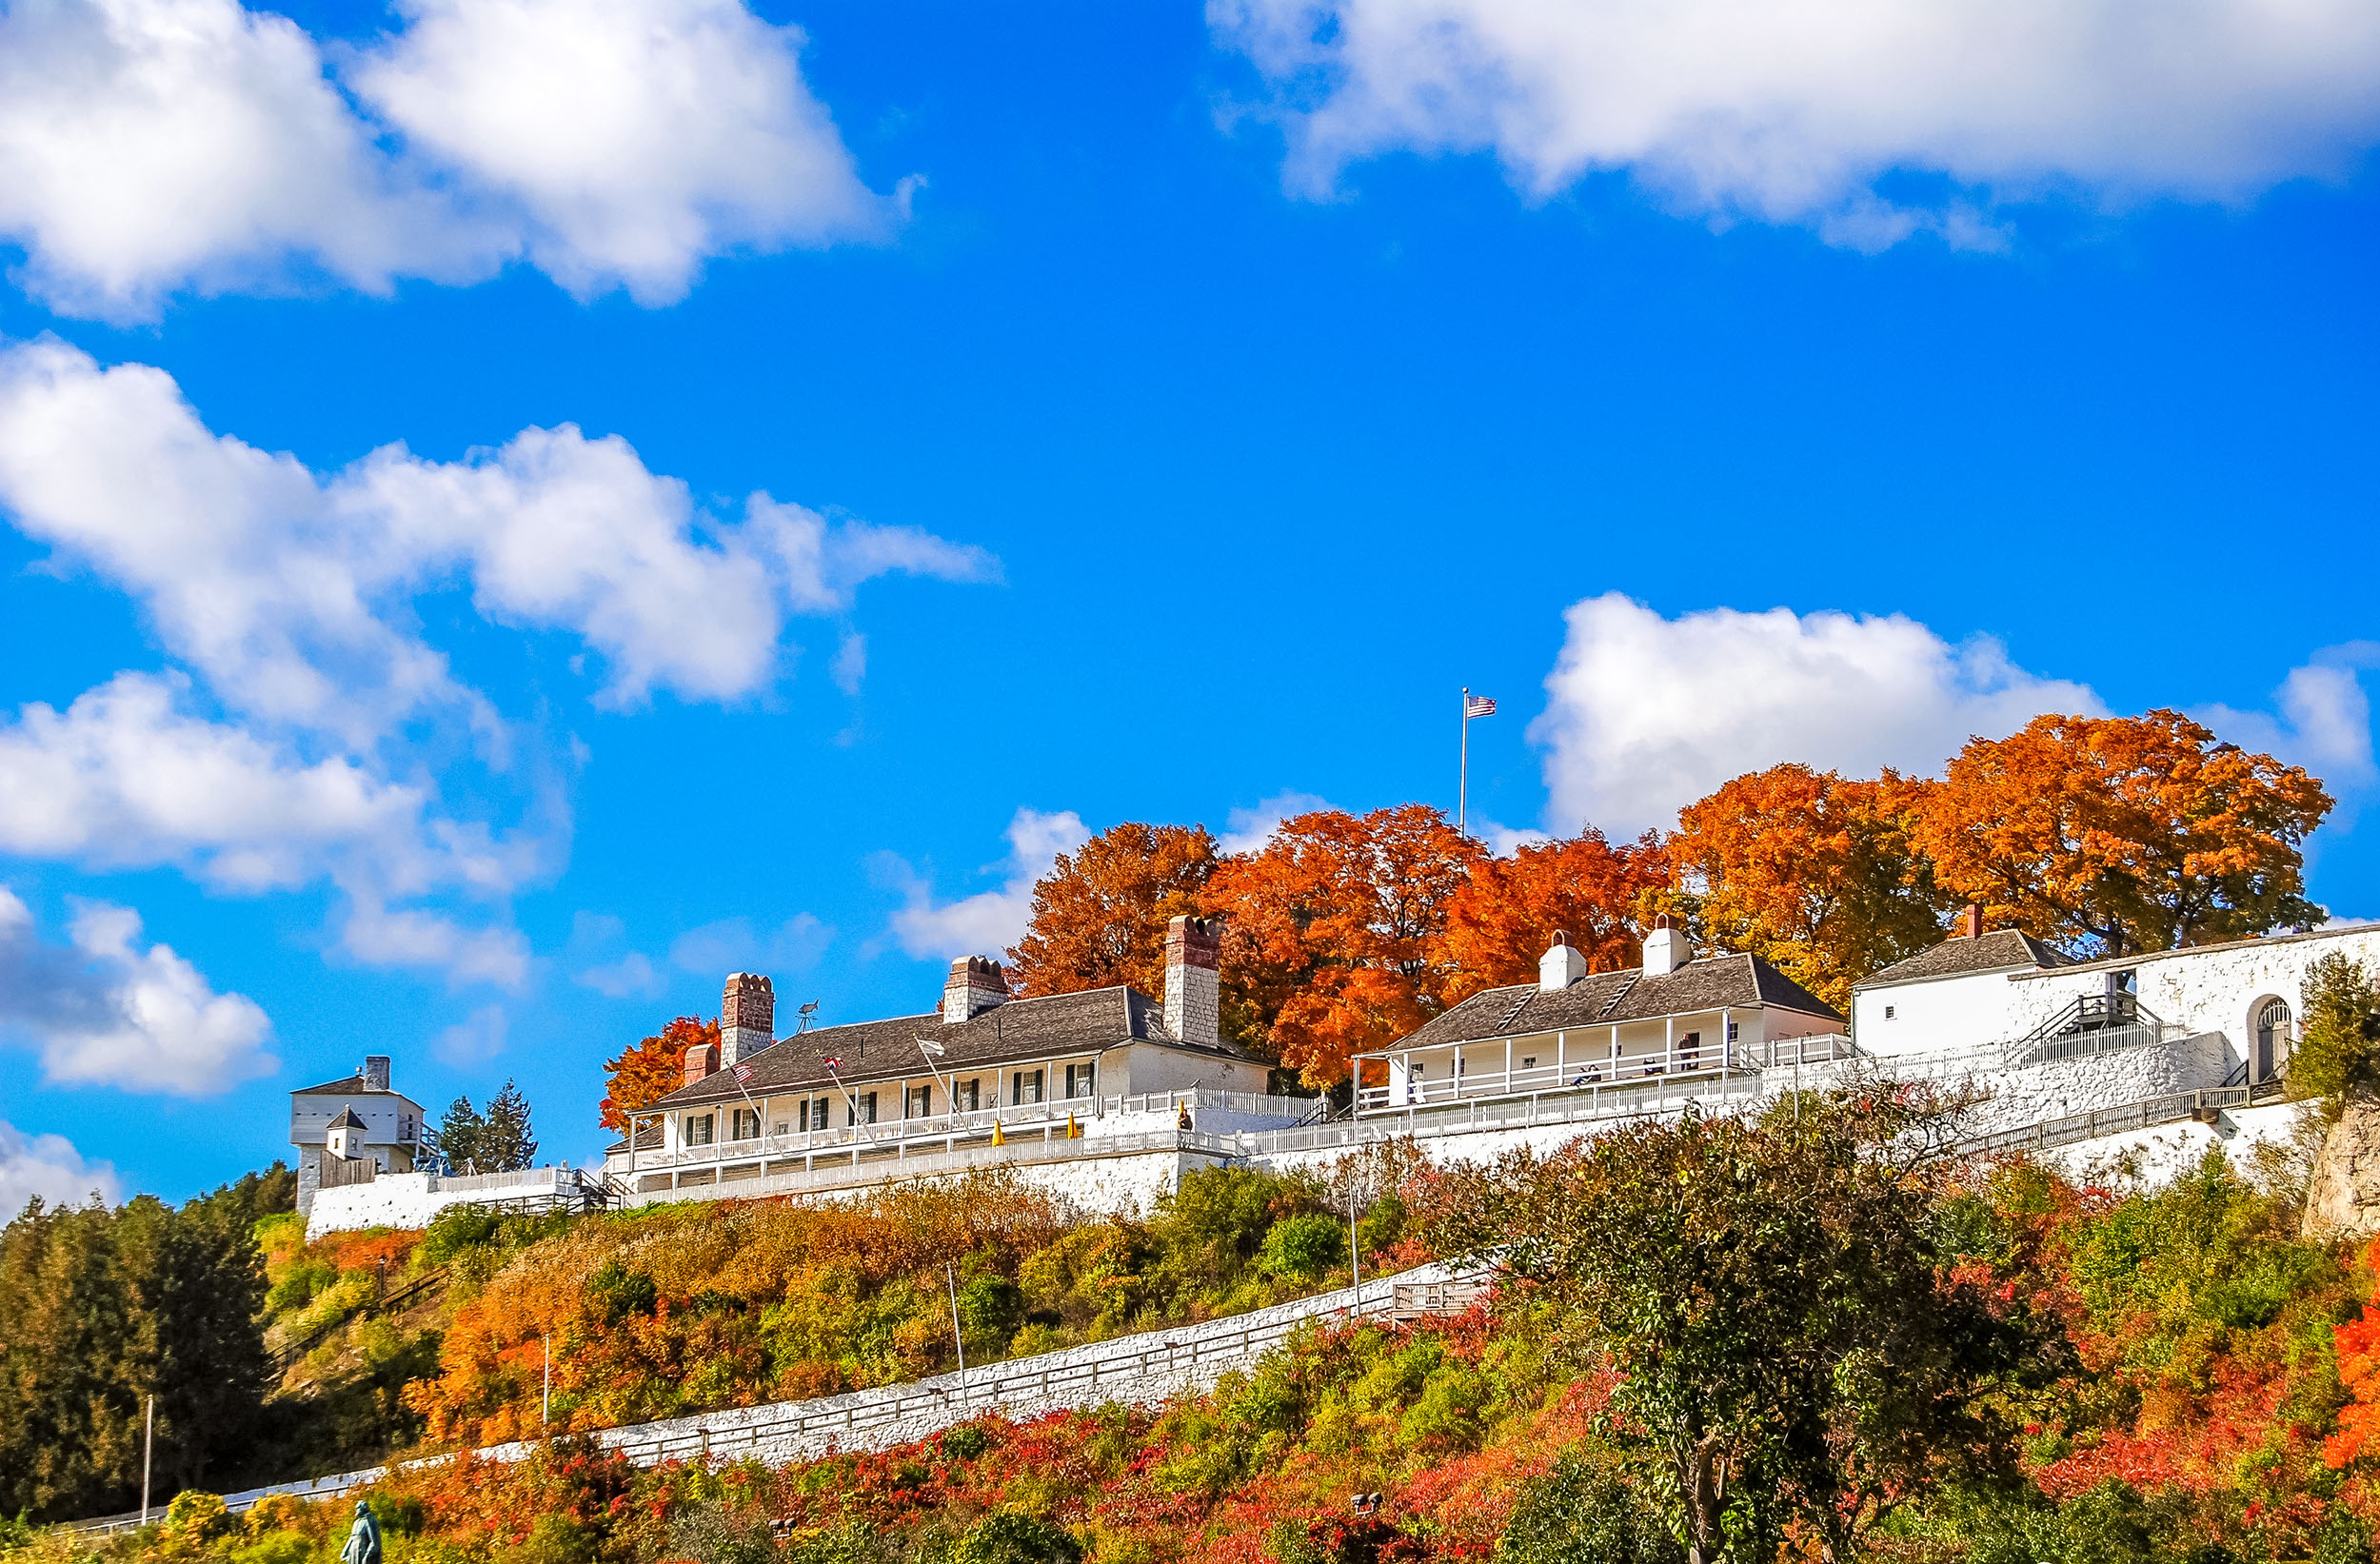 Island House Hotel Mackinac Island Fall Getaway - Fall Colors up at the Fort